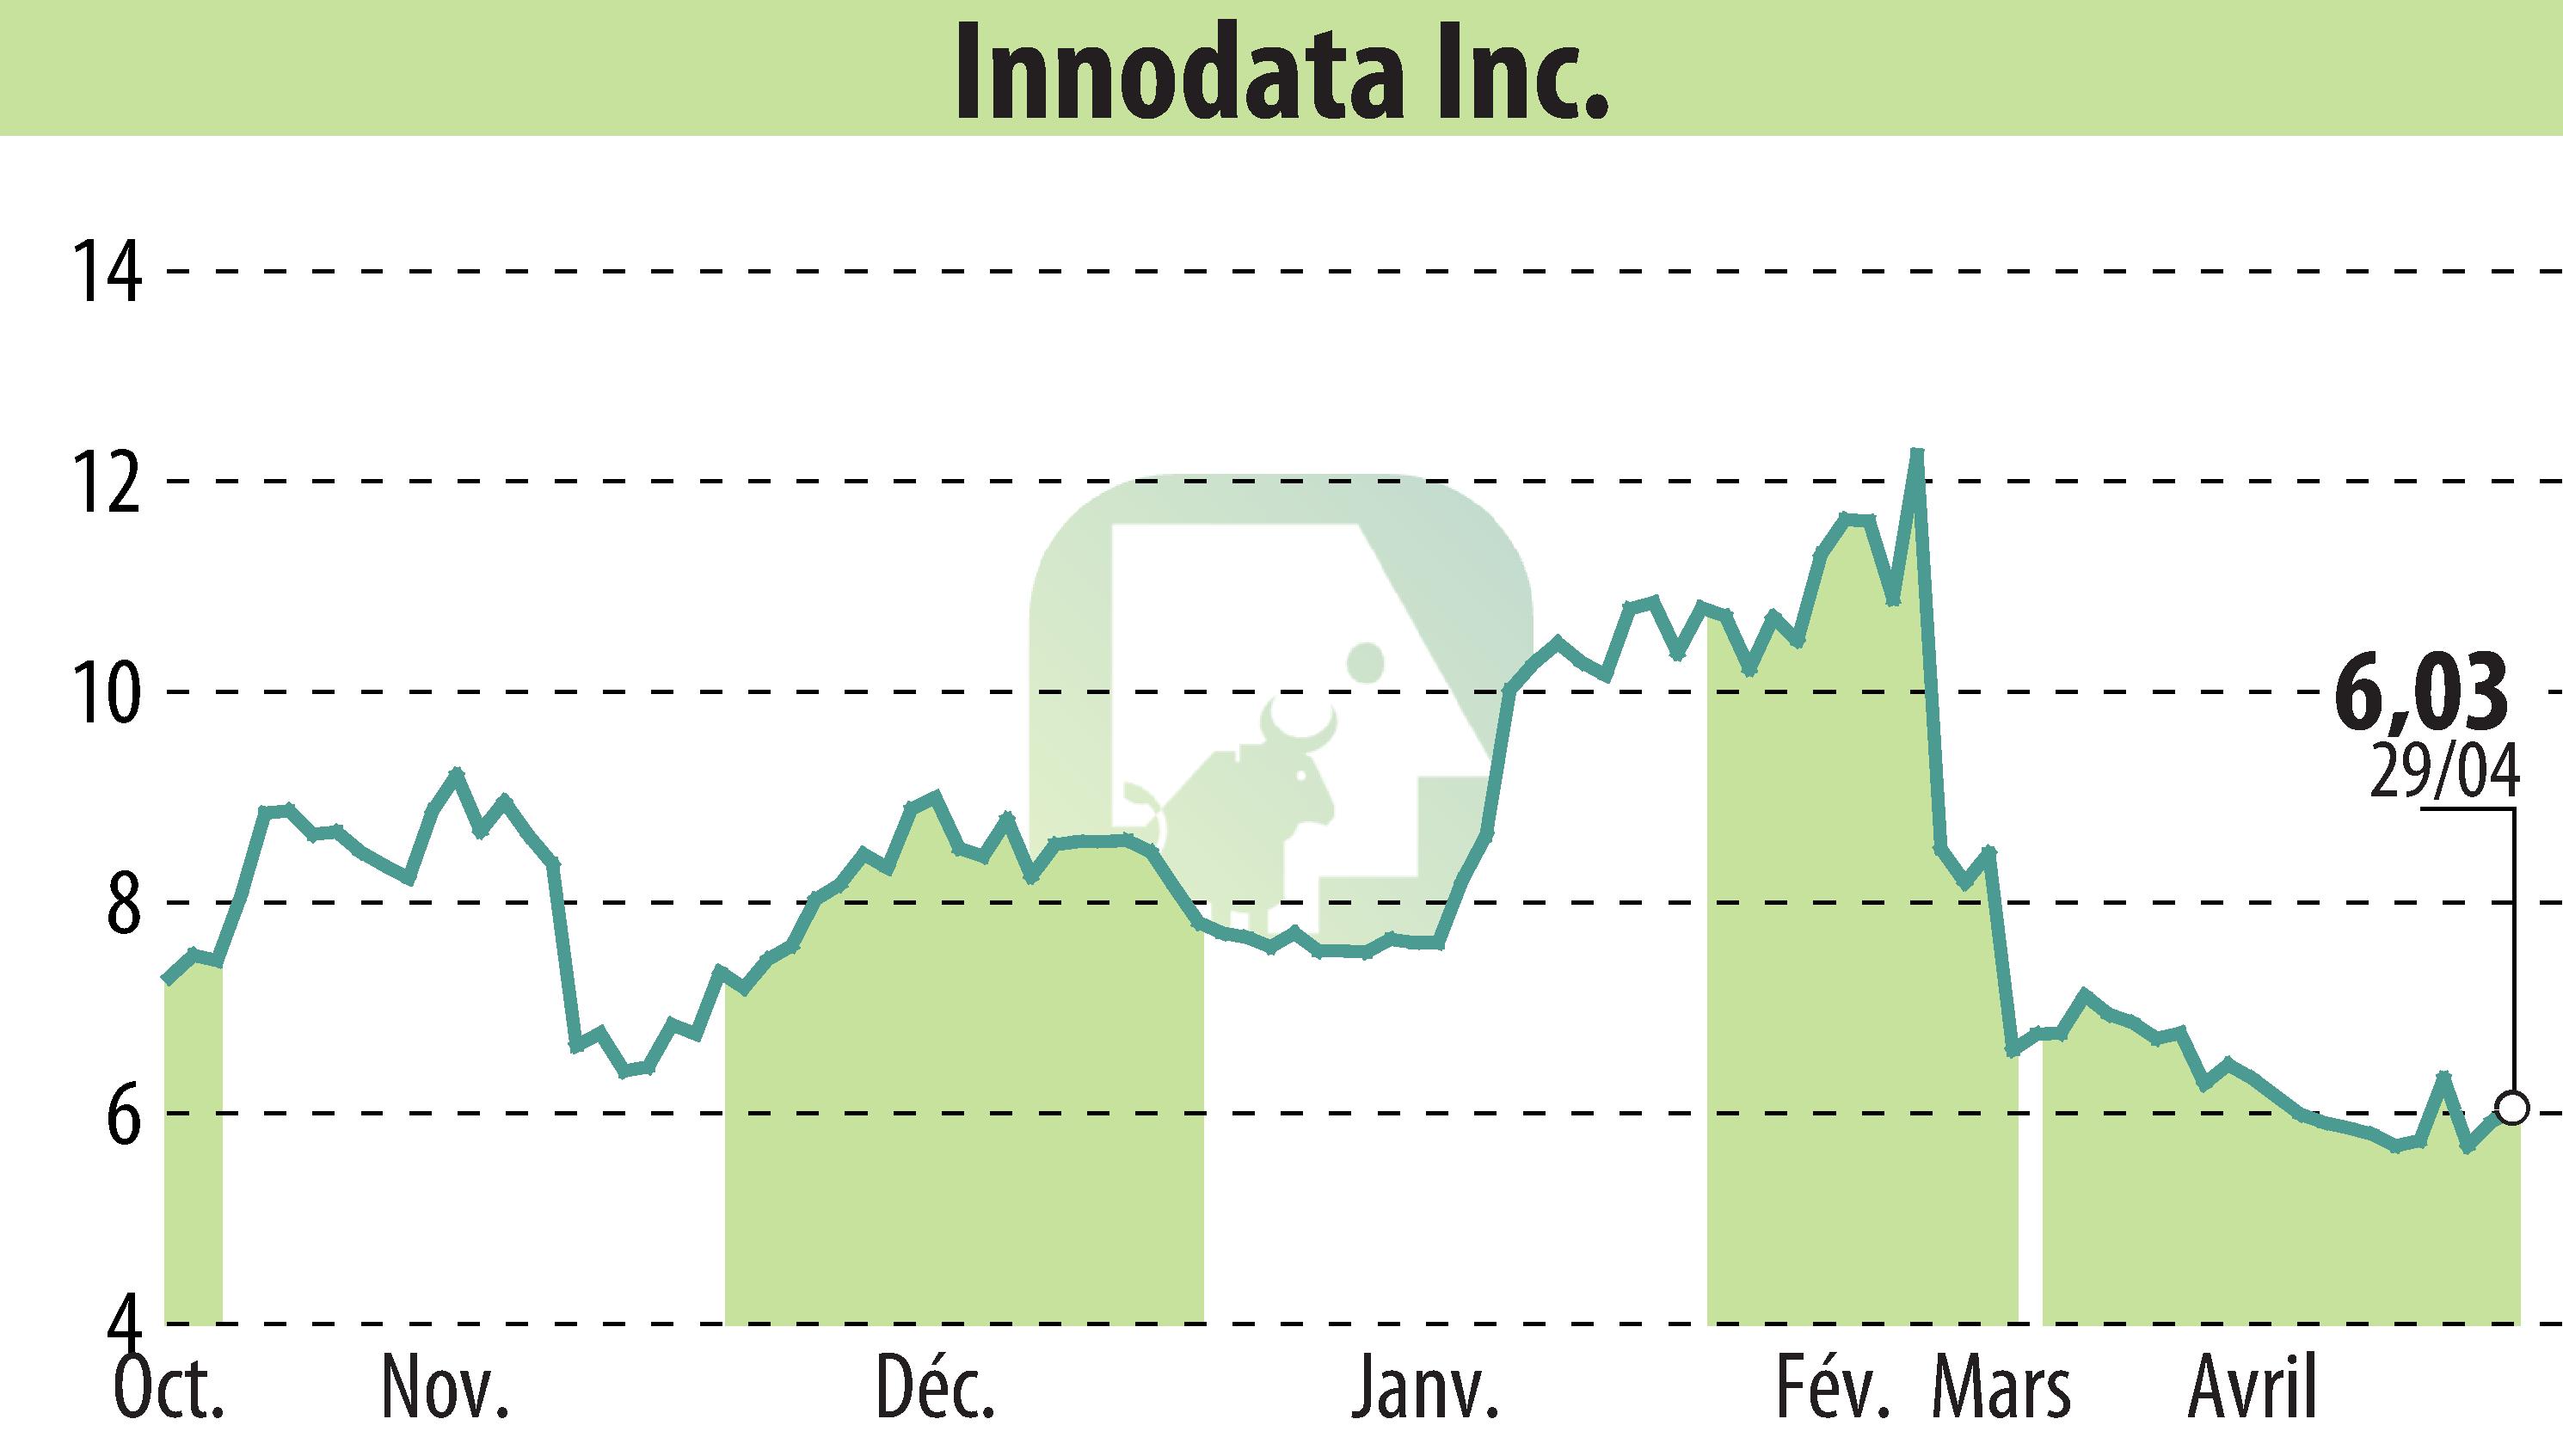 Stock price chart of Innodata Inc. (EBR:INOD) showing fluctuations.